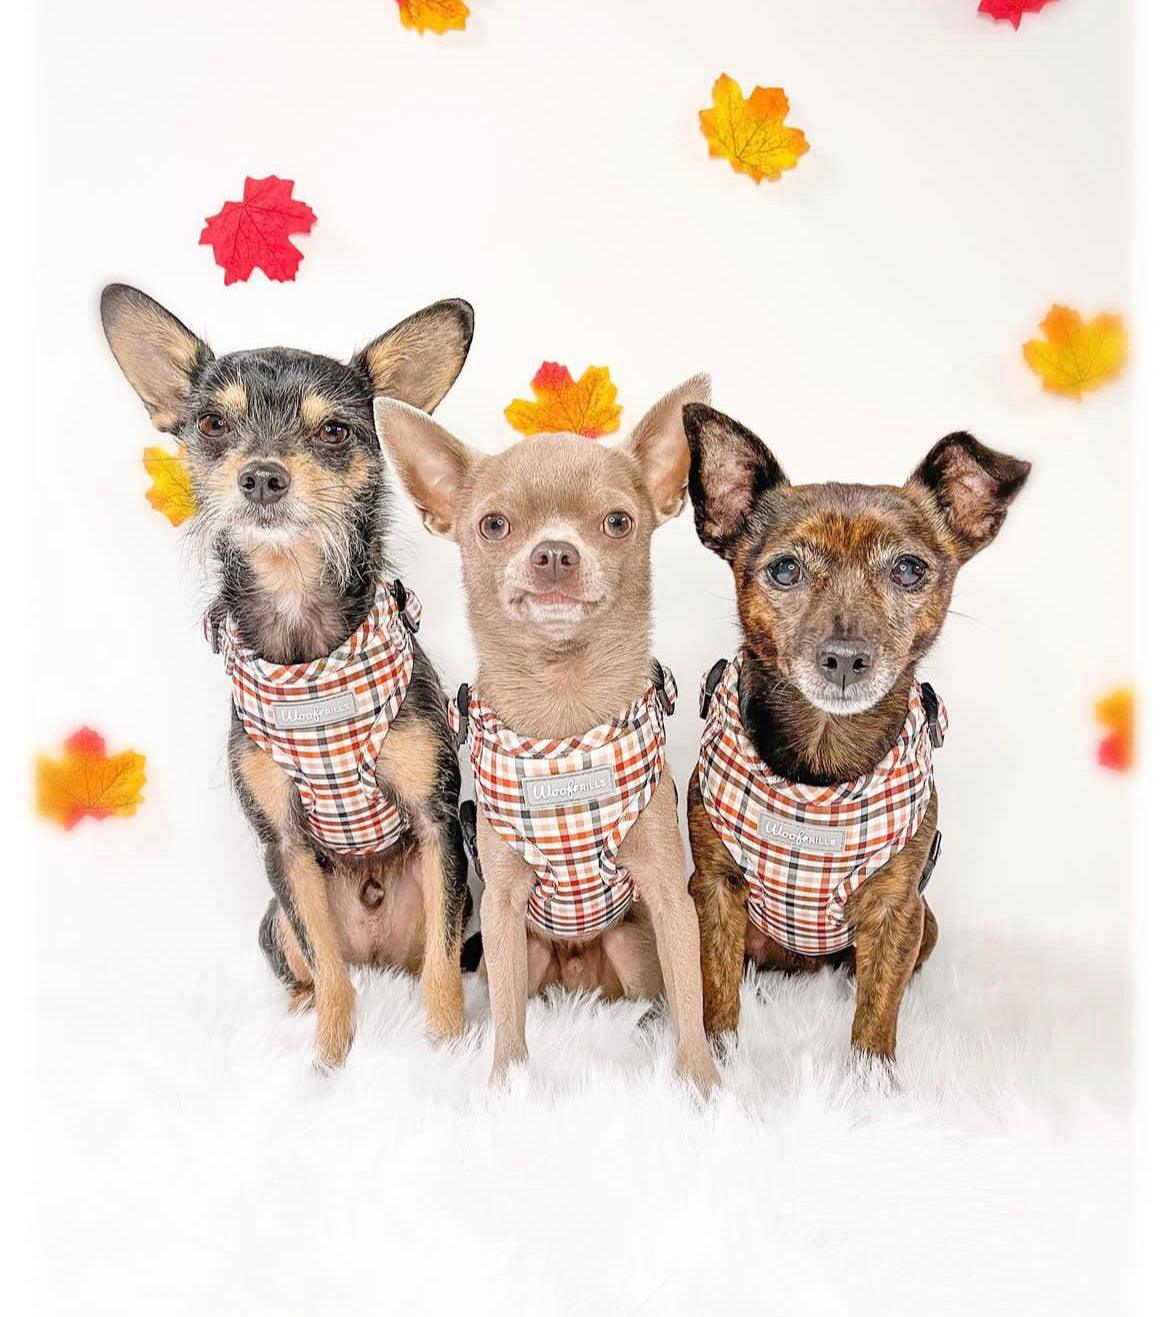 Three small dogs wearing matching adjustable dog  harnesses